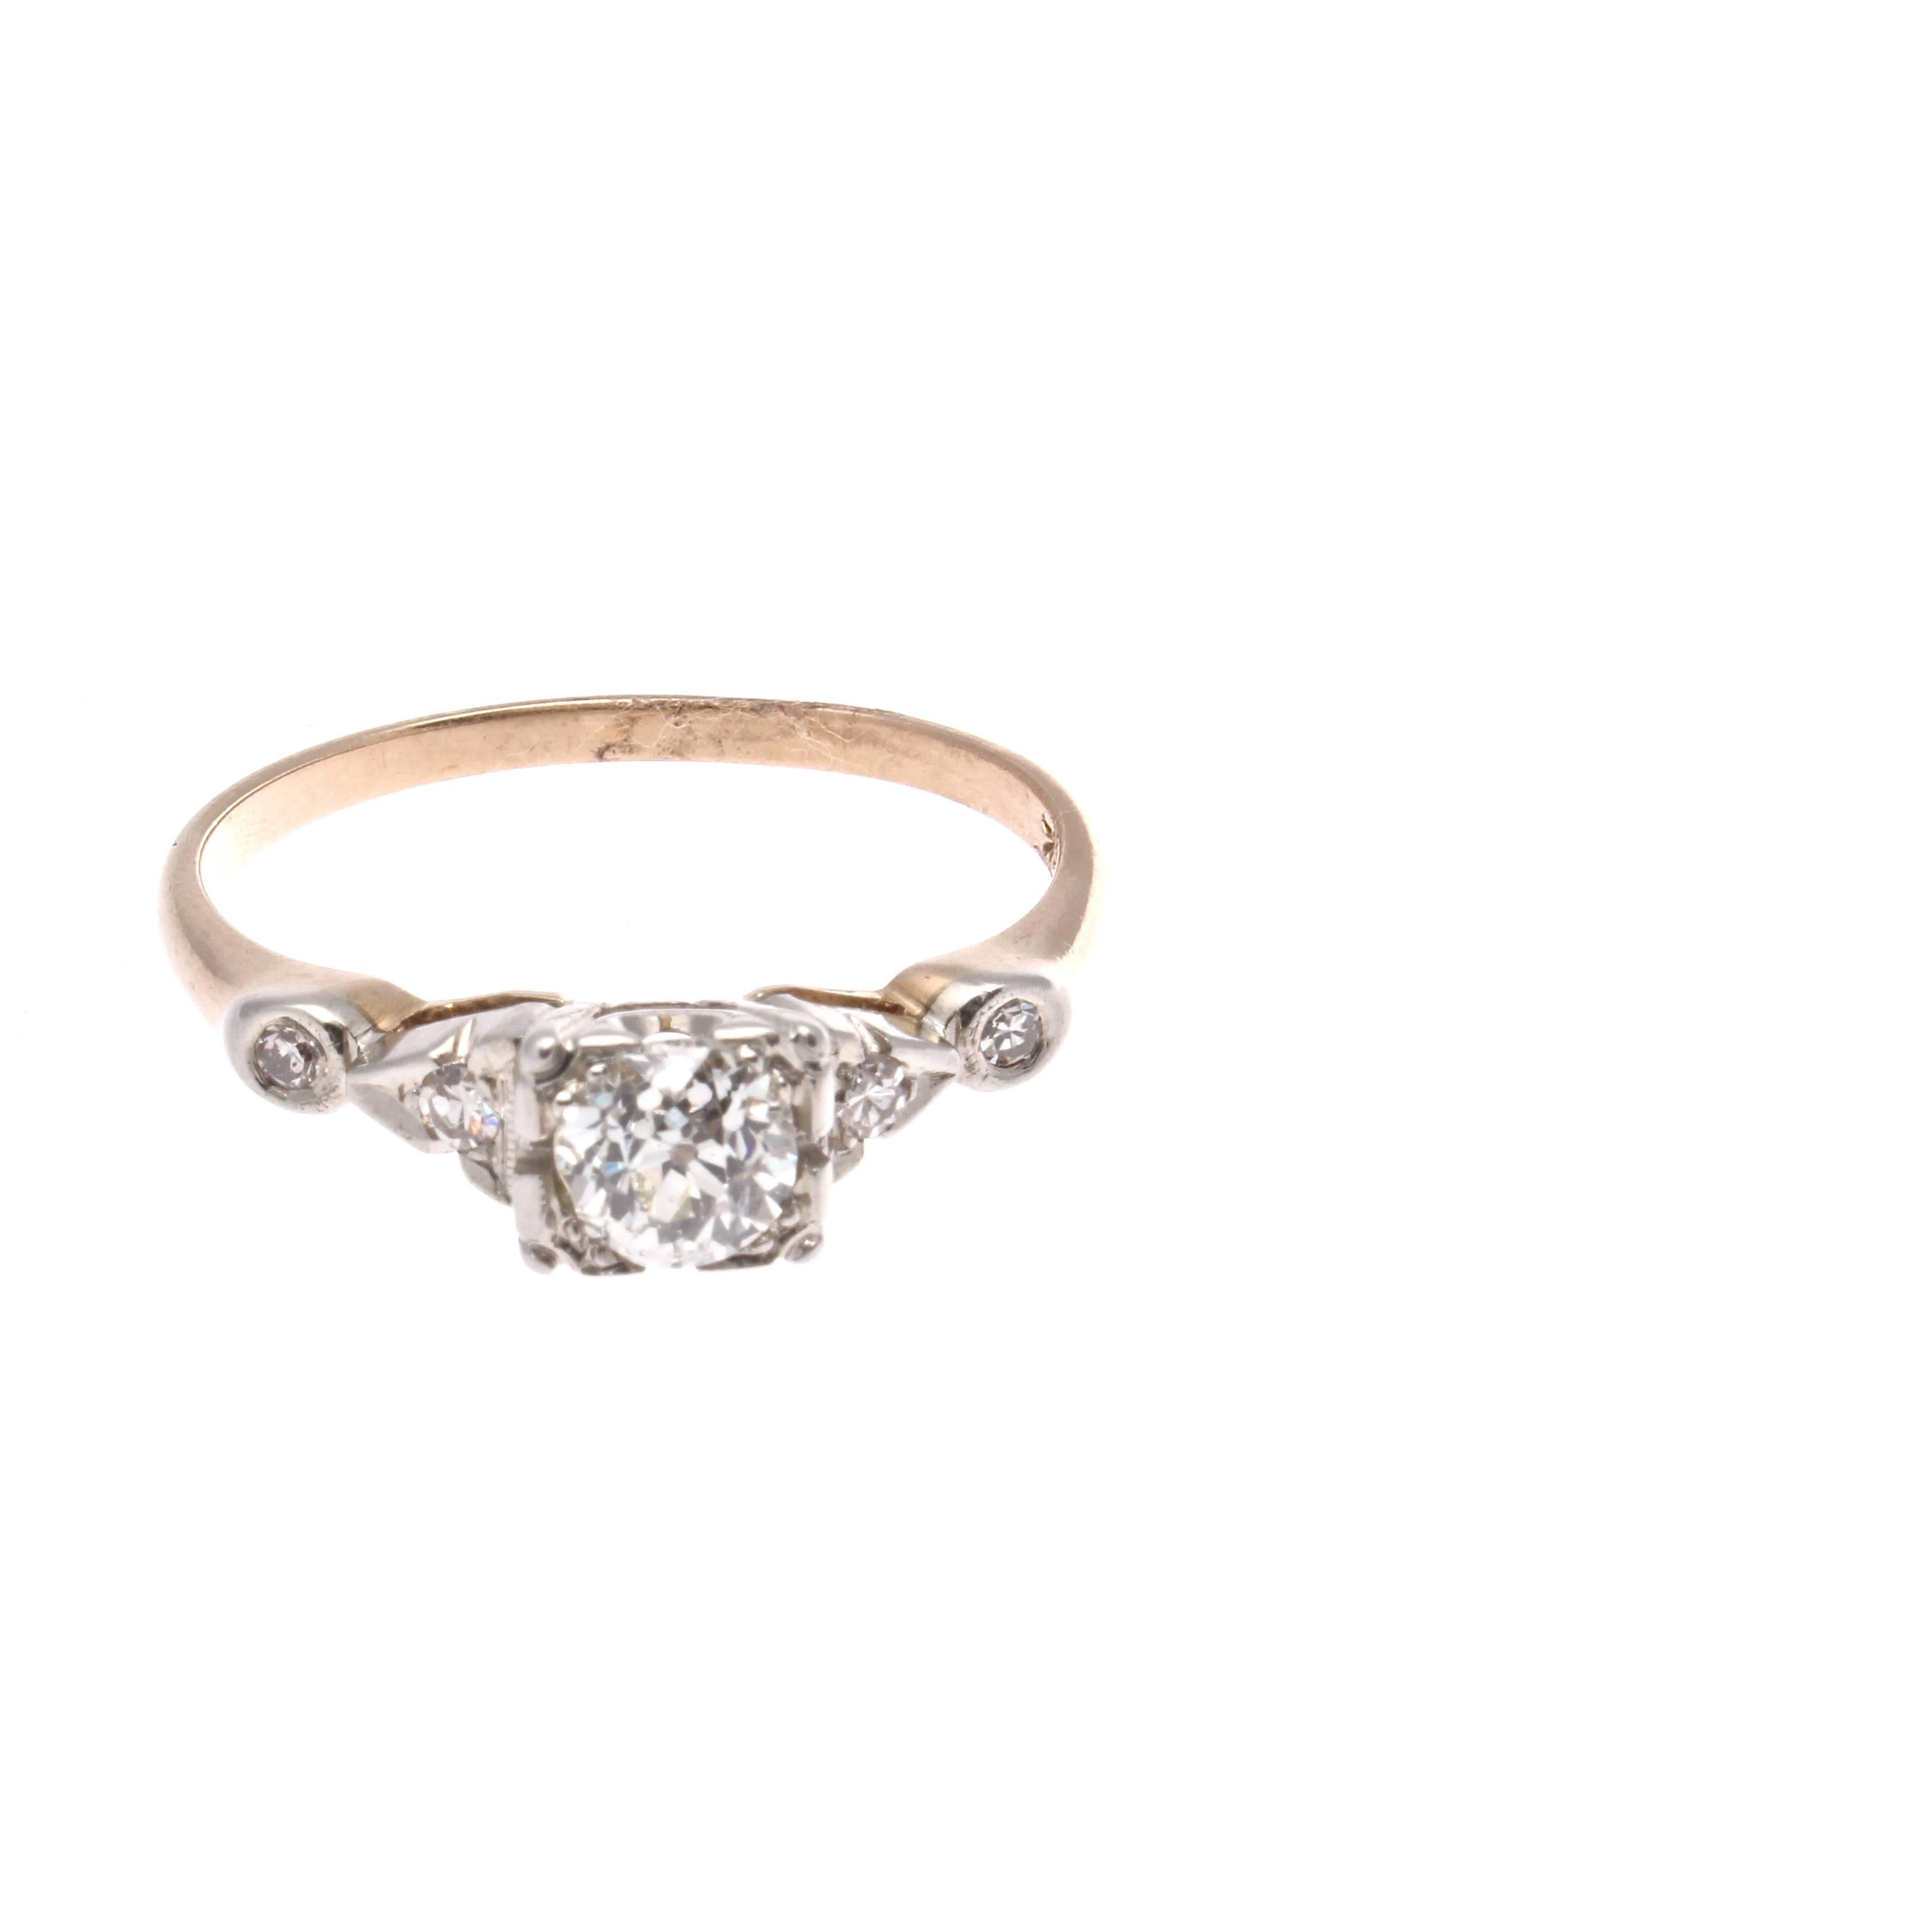 A lovely old cut sparkling diamond is featured in this graceful victorian ring. Accented by two smaller round cut diamonds on either side and hand crafted in an 14k yellow gold ring. 

Ring size 6 and may be re-sized.